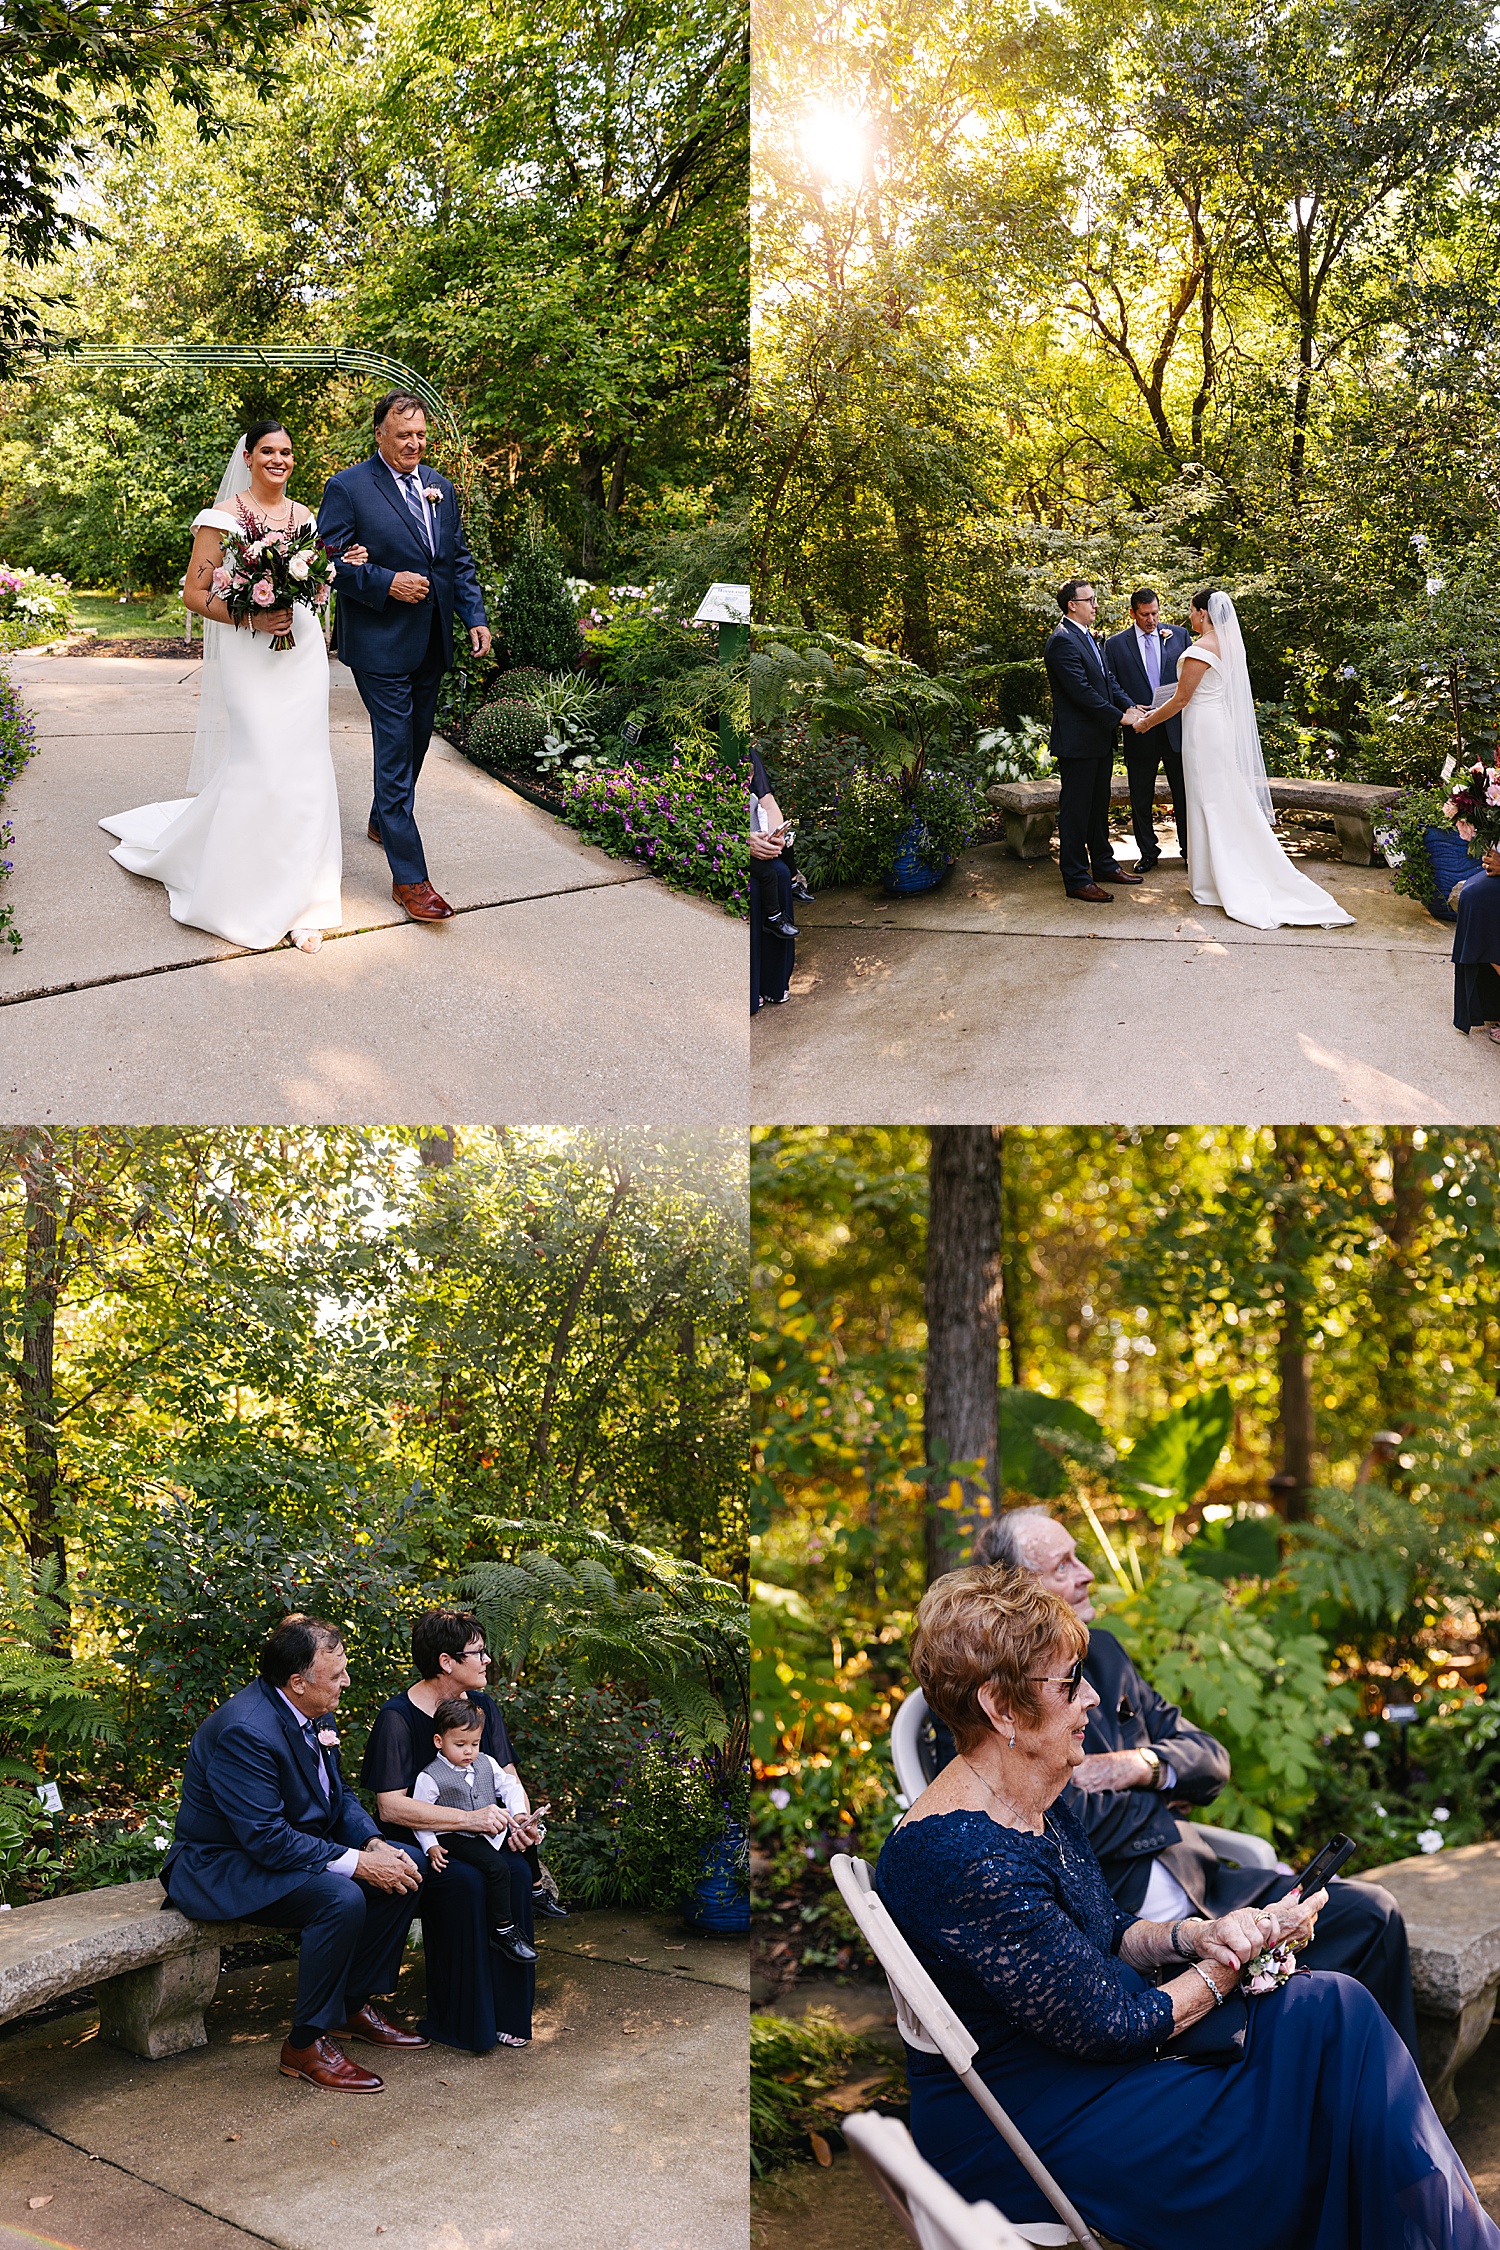 Father of bride walks daughter down the aisle during wedding ceremony at Overland Park Arboretum